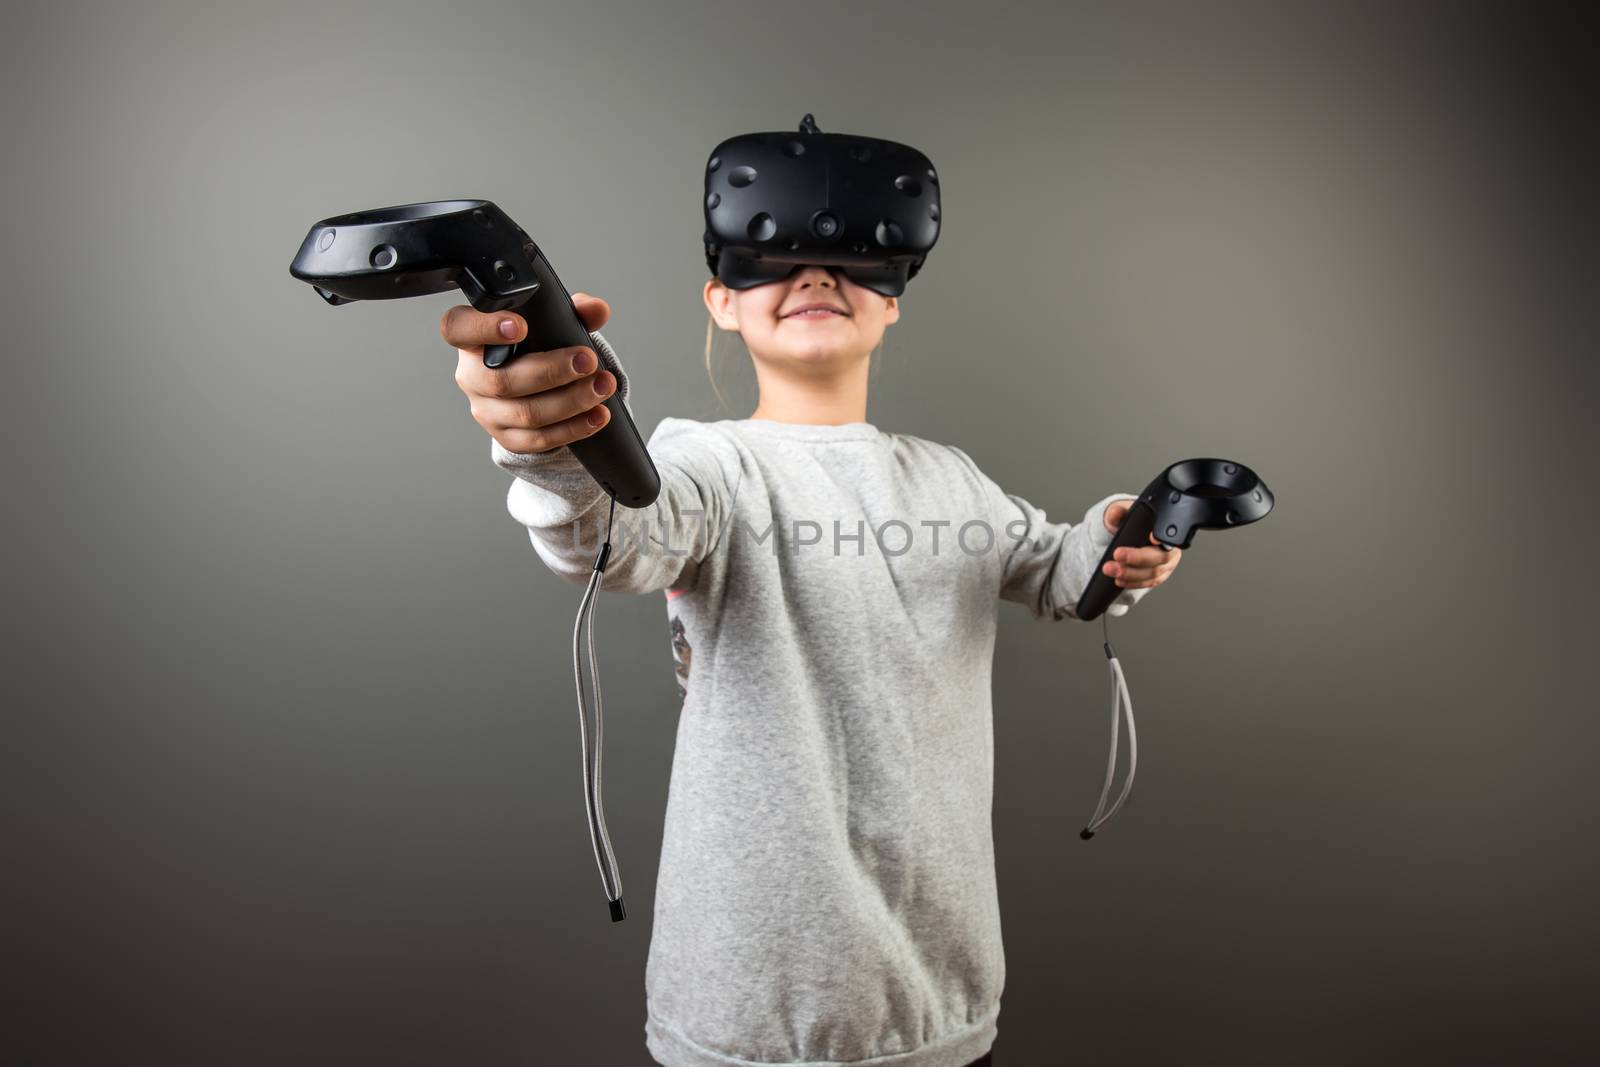 smile Child with virtual reality headset and joystick playing video games by ufabizphoto